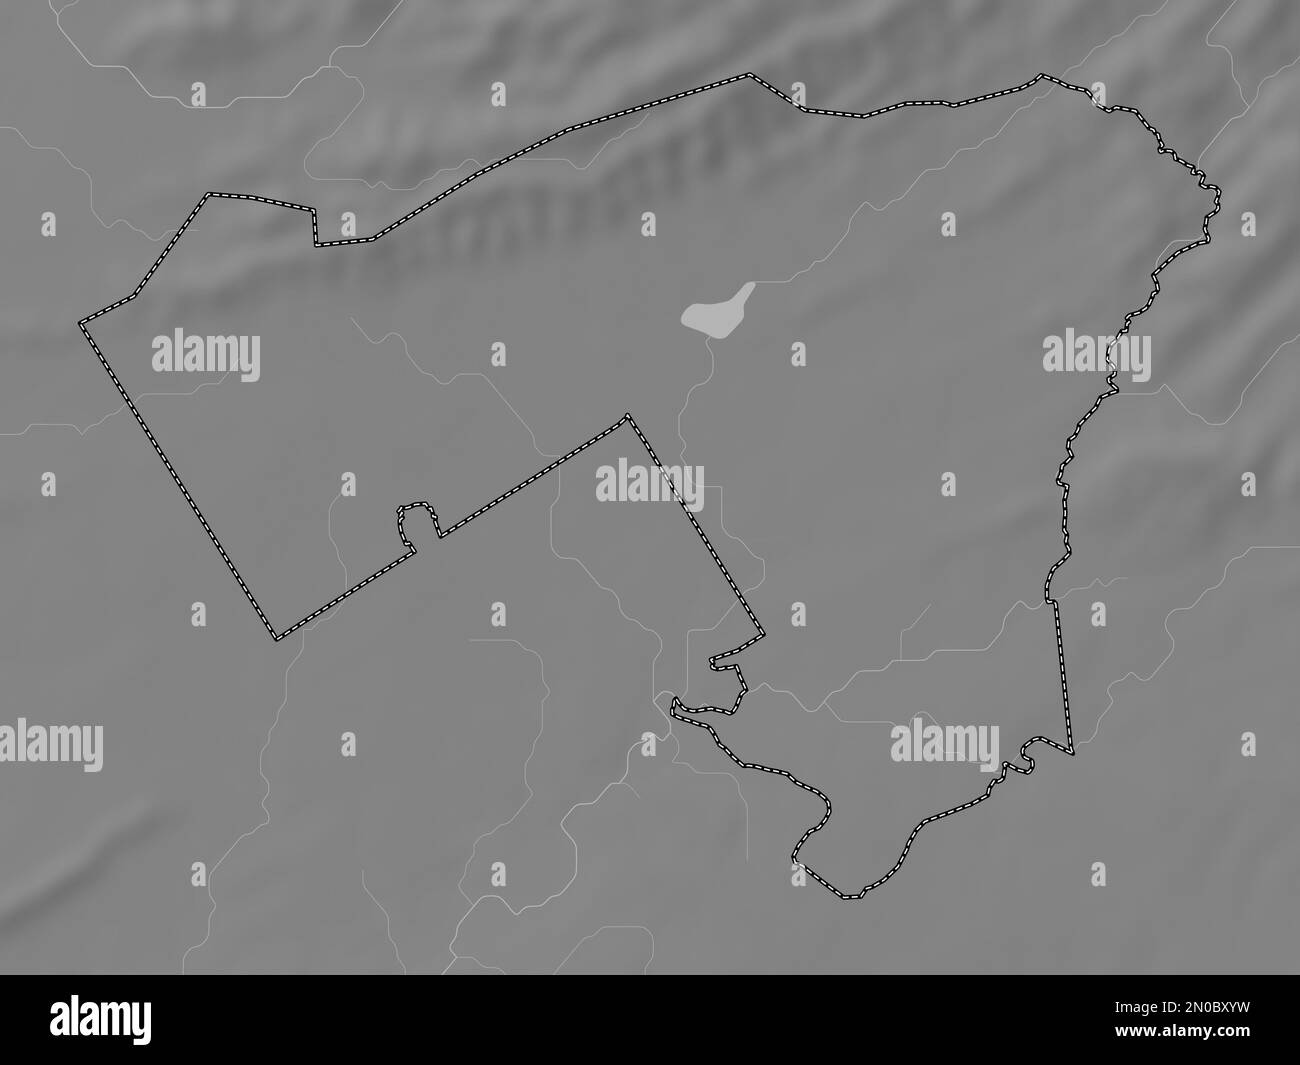 Islamabad Capital Territory, capital territory of Pakistan. Grayscale elevation map with lakes and rivers Stock Photo